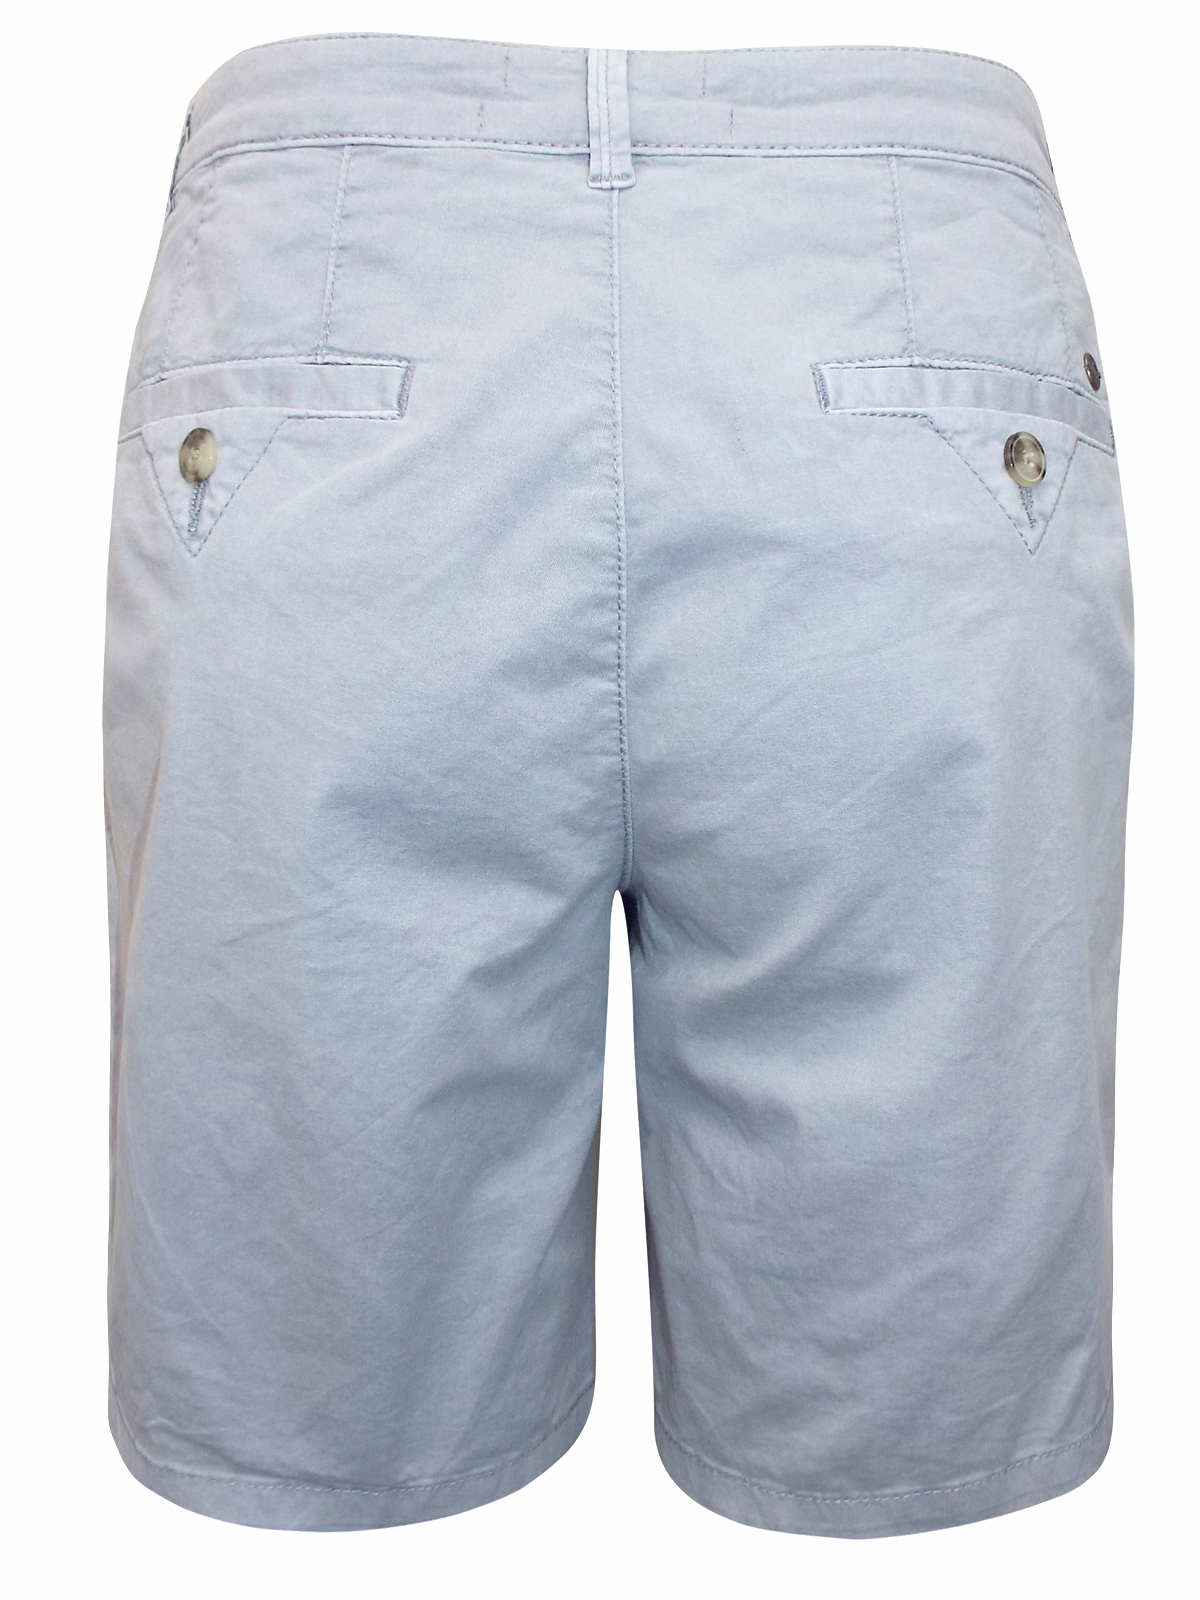 Esprit - - 3Sprit GREY-BLUE Cotton Rich Long Chino Shorts - Size 12 to 14